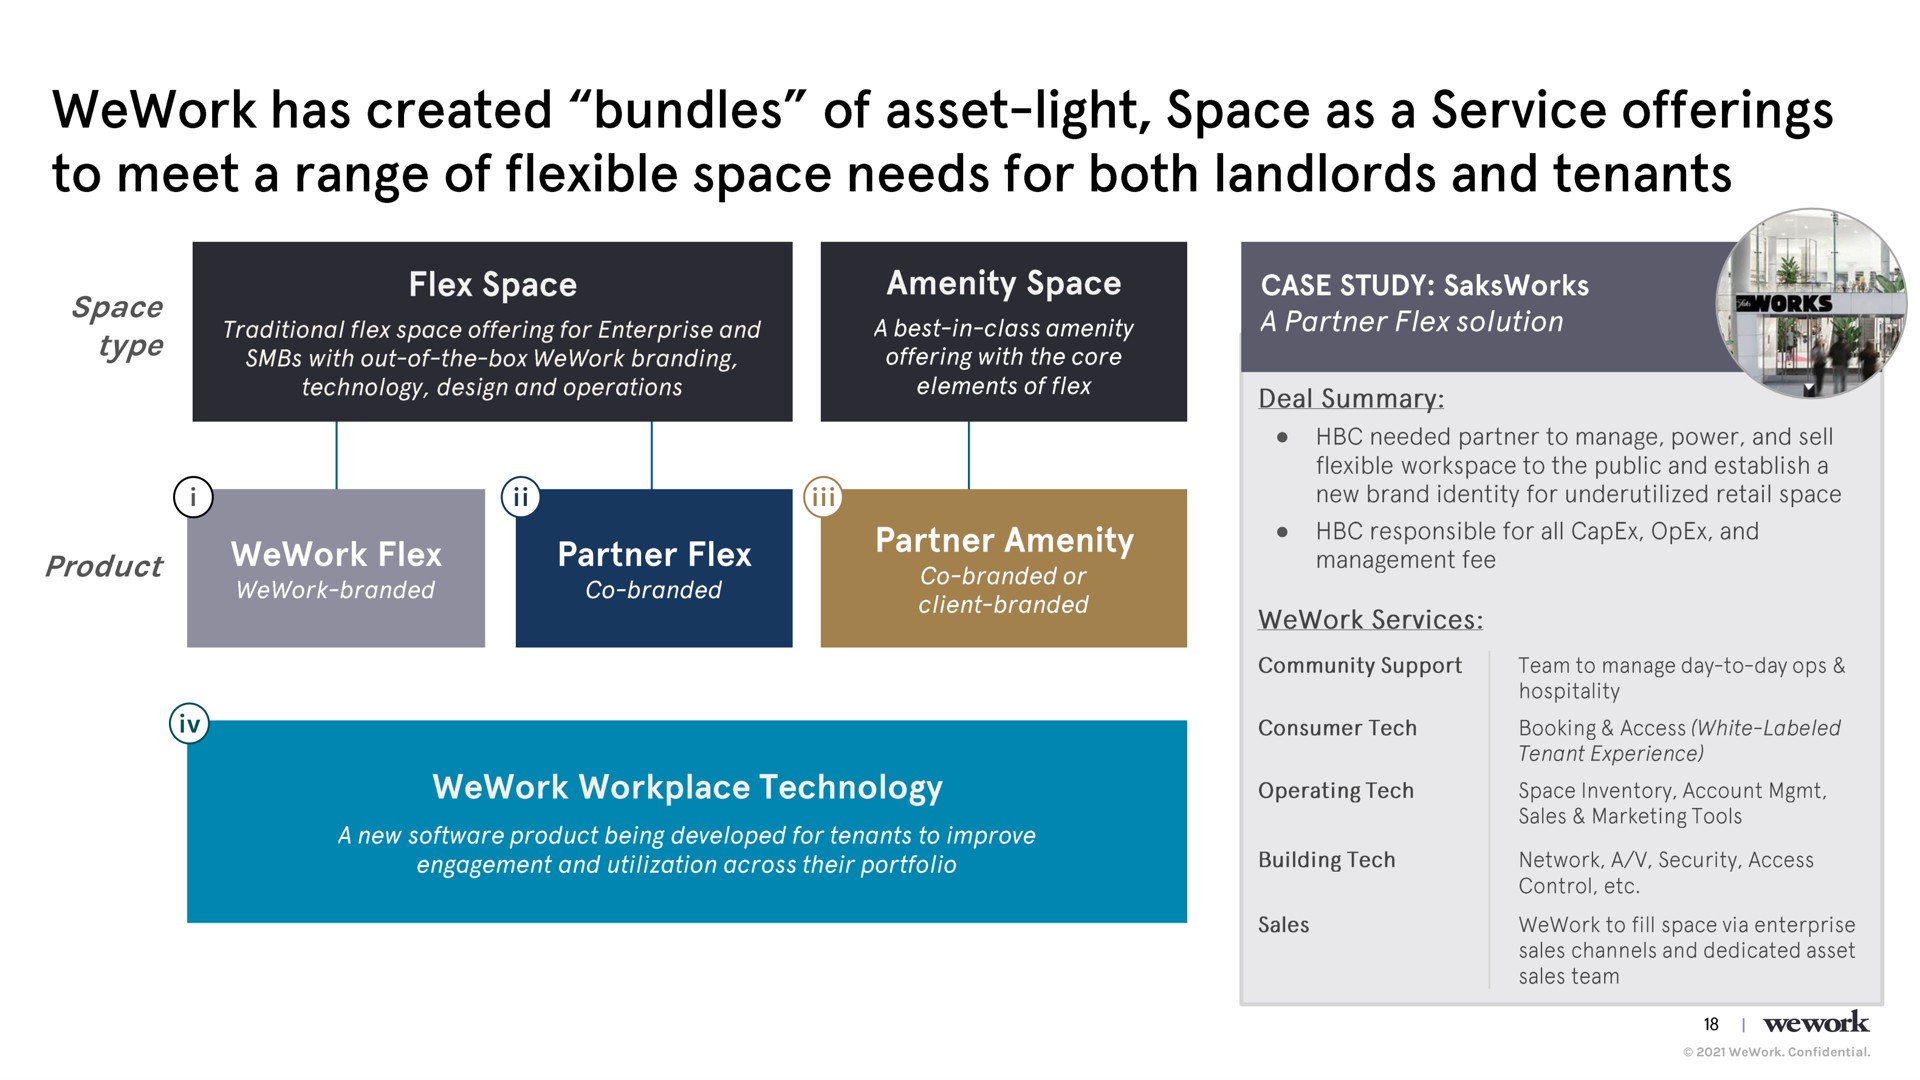 space type product has created bundles of asset light as a service offerings to meet a range of flexible needs for both landlords and tenants flex partner flex | WeWork